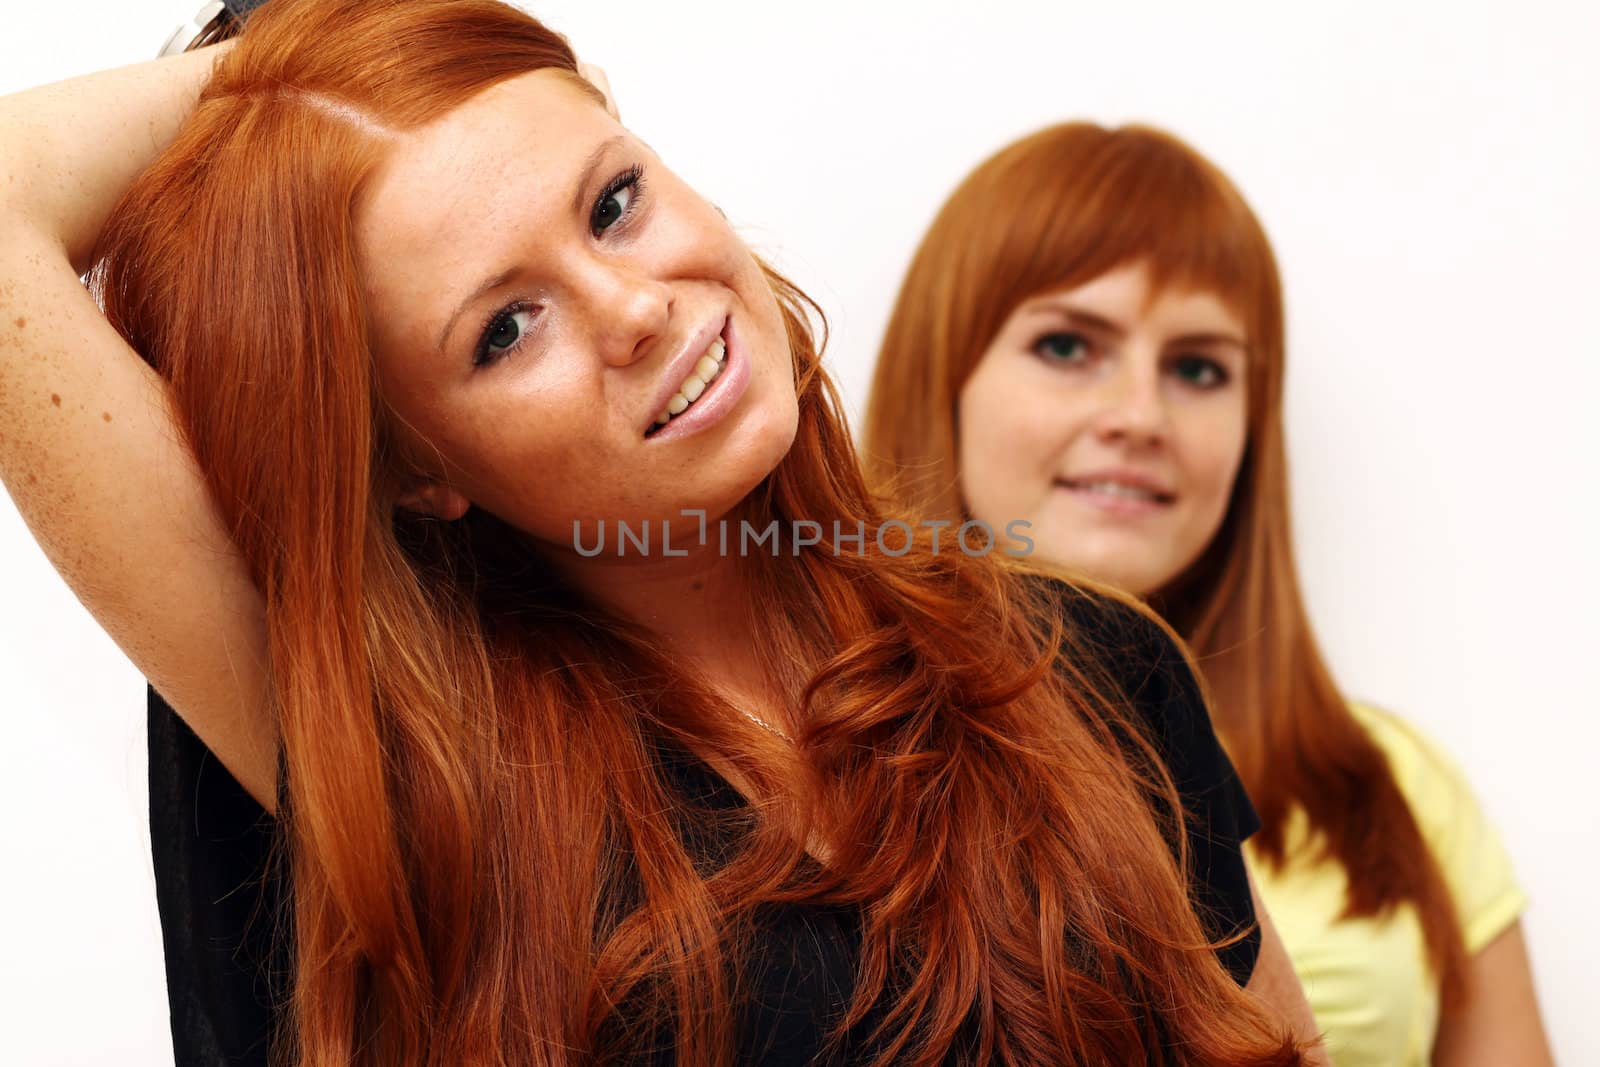 Two young beautiful redhead women by andersonrise